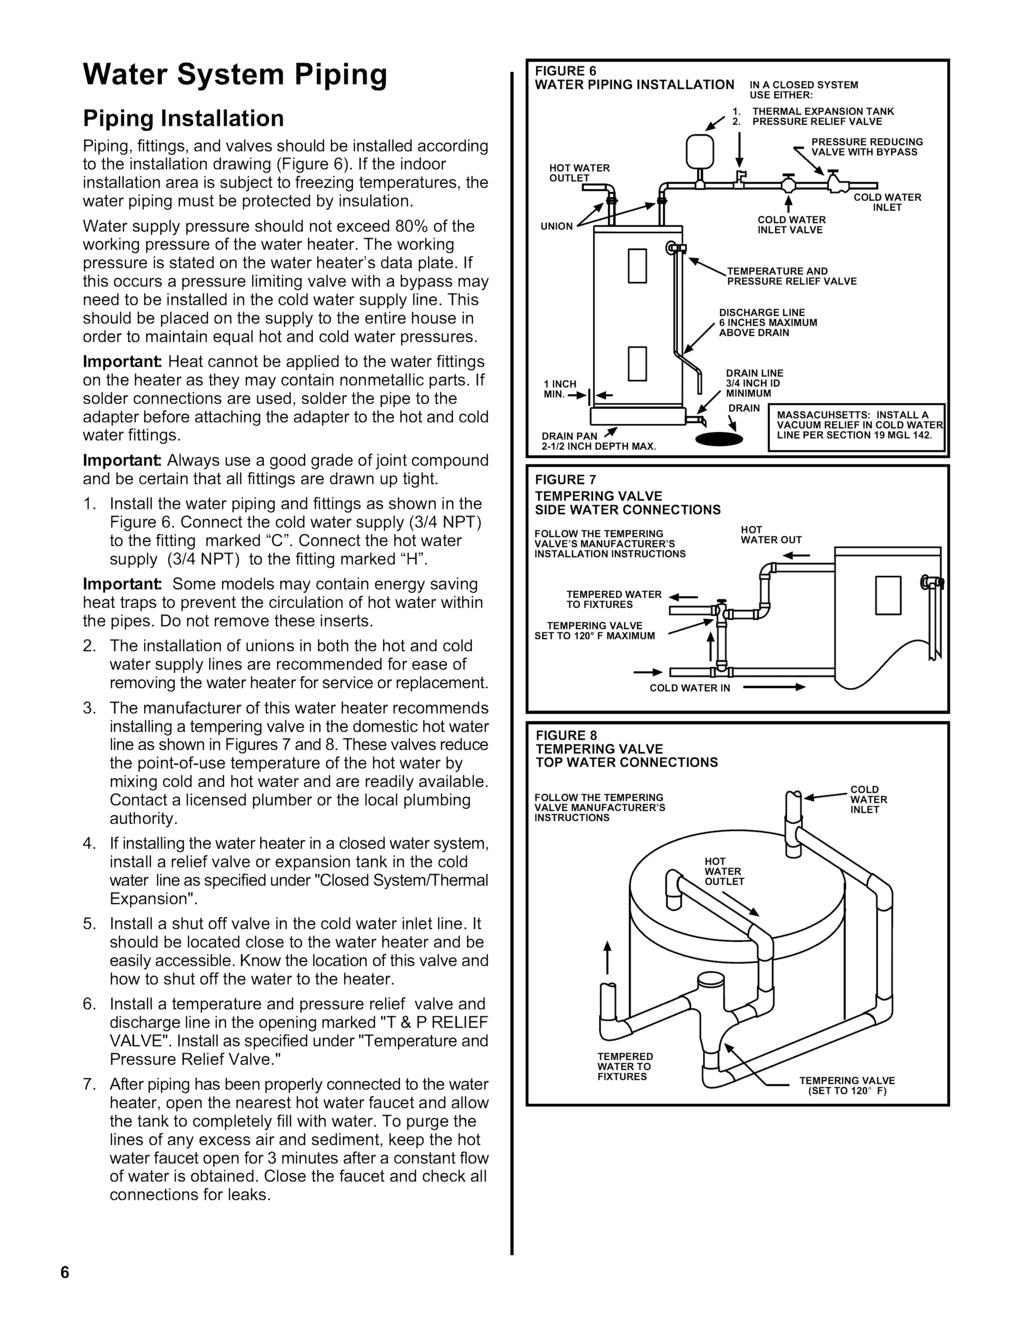 Water System Piping Piping Installation Piping, fittings, and valves should be installed according to the installation drawing (Figure 6).